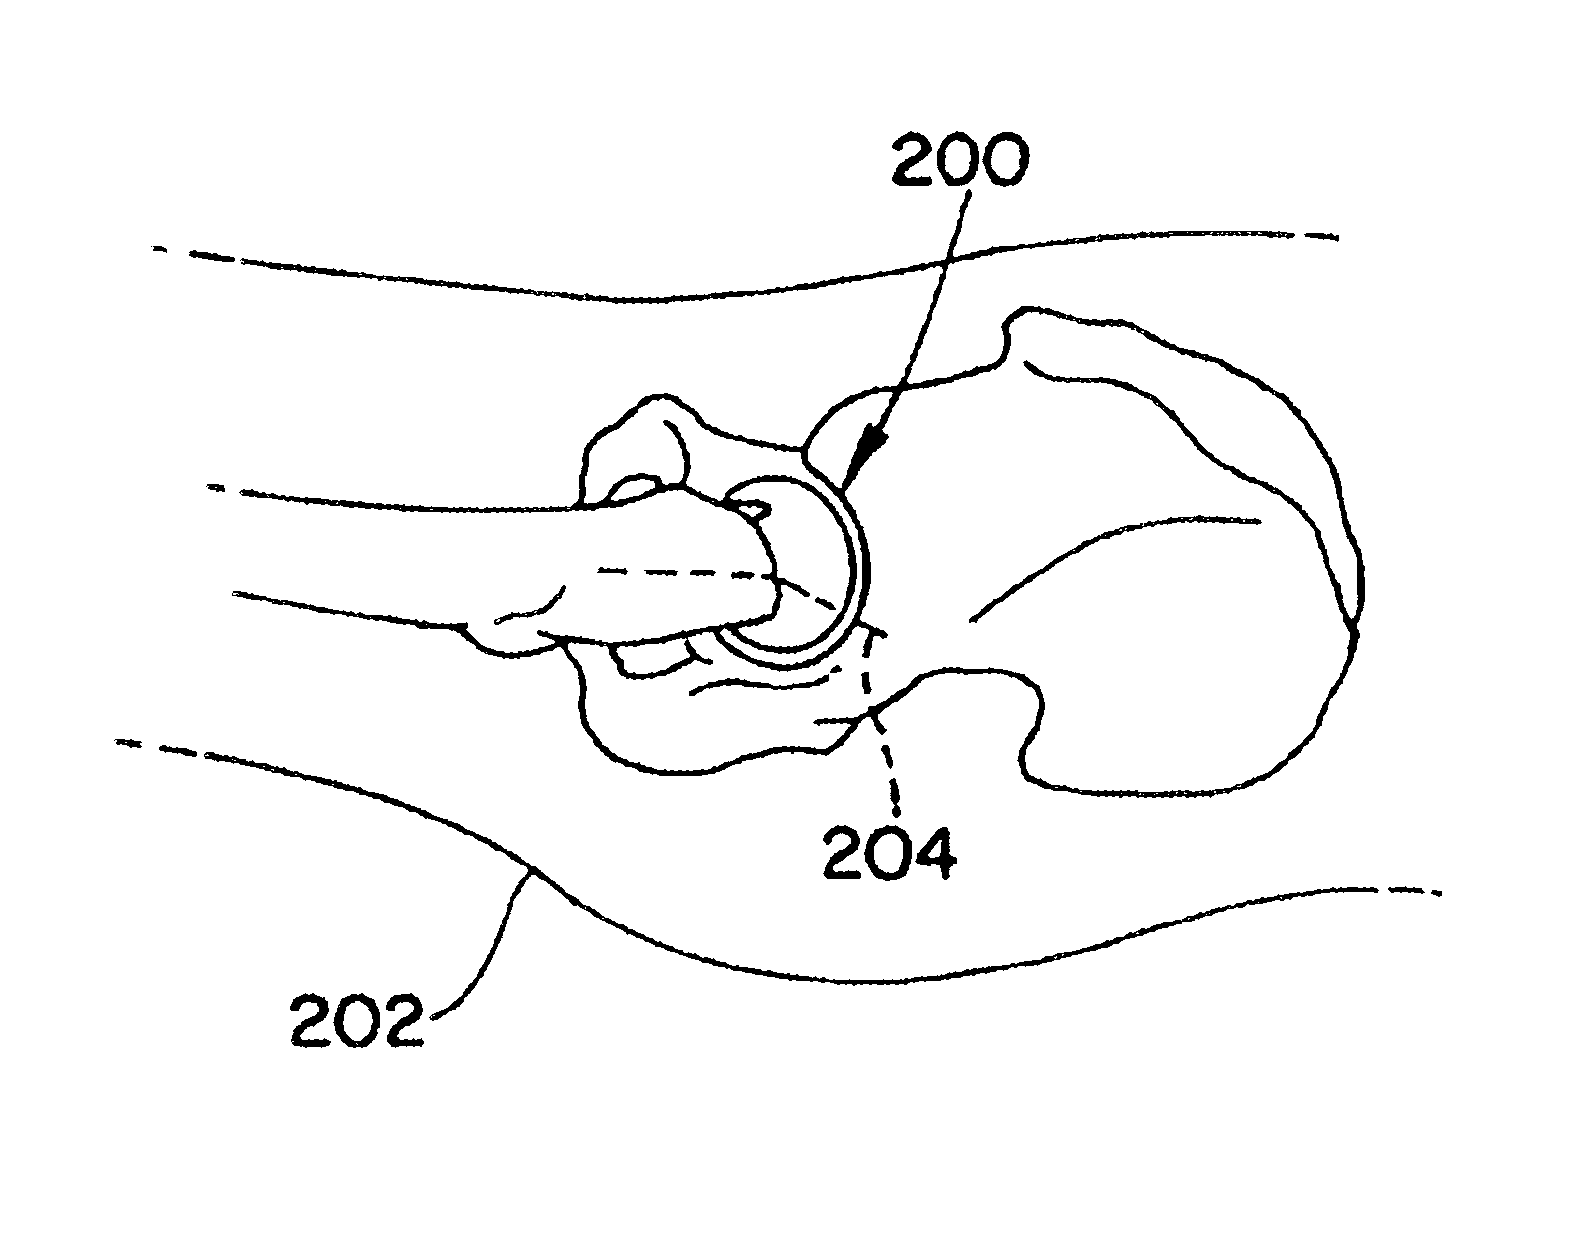 Posterior retractor and method of use for minimally invasive hip surgery